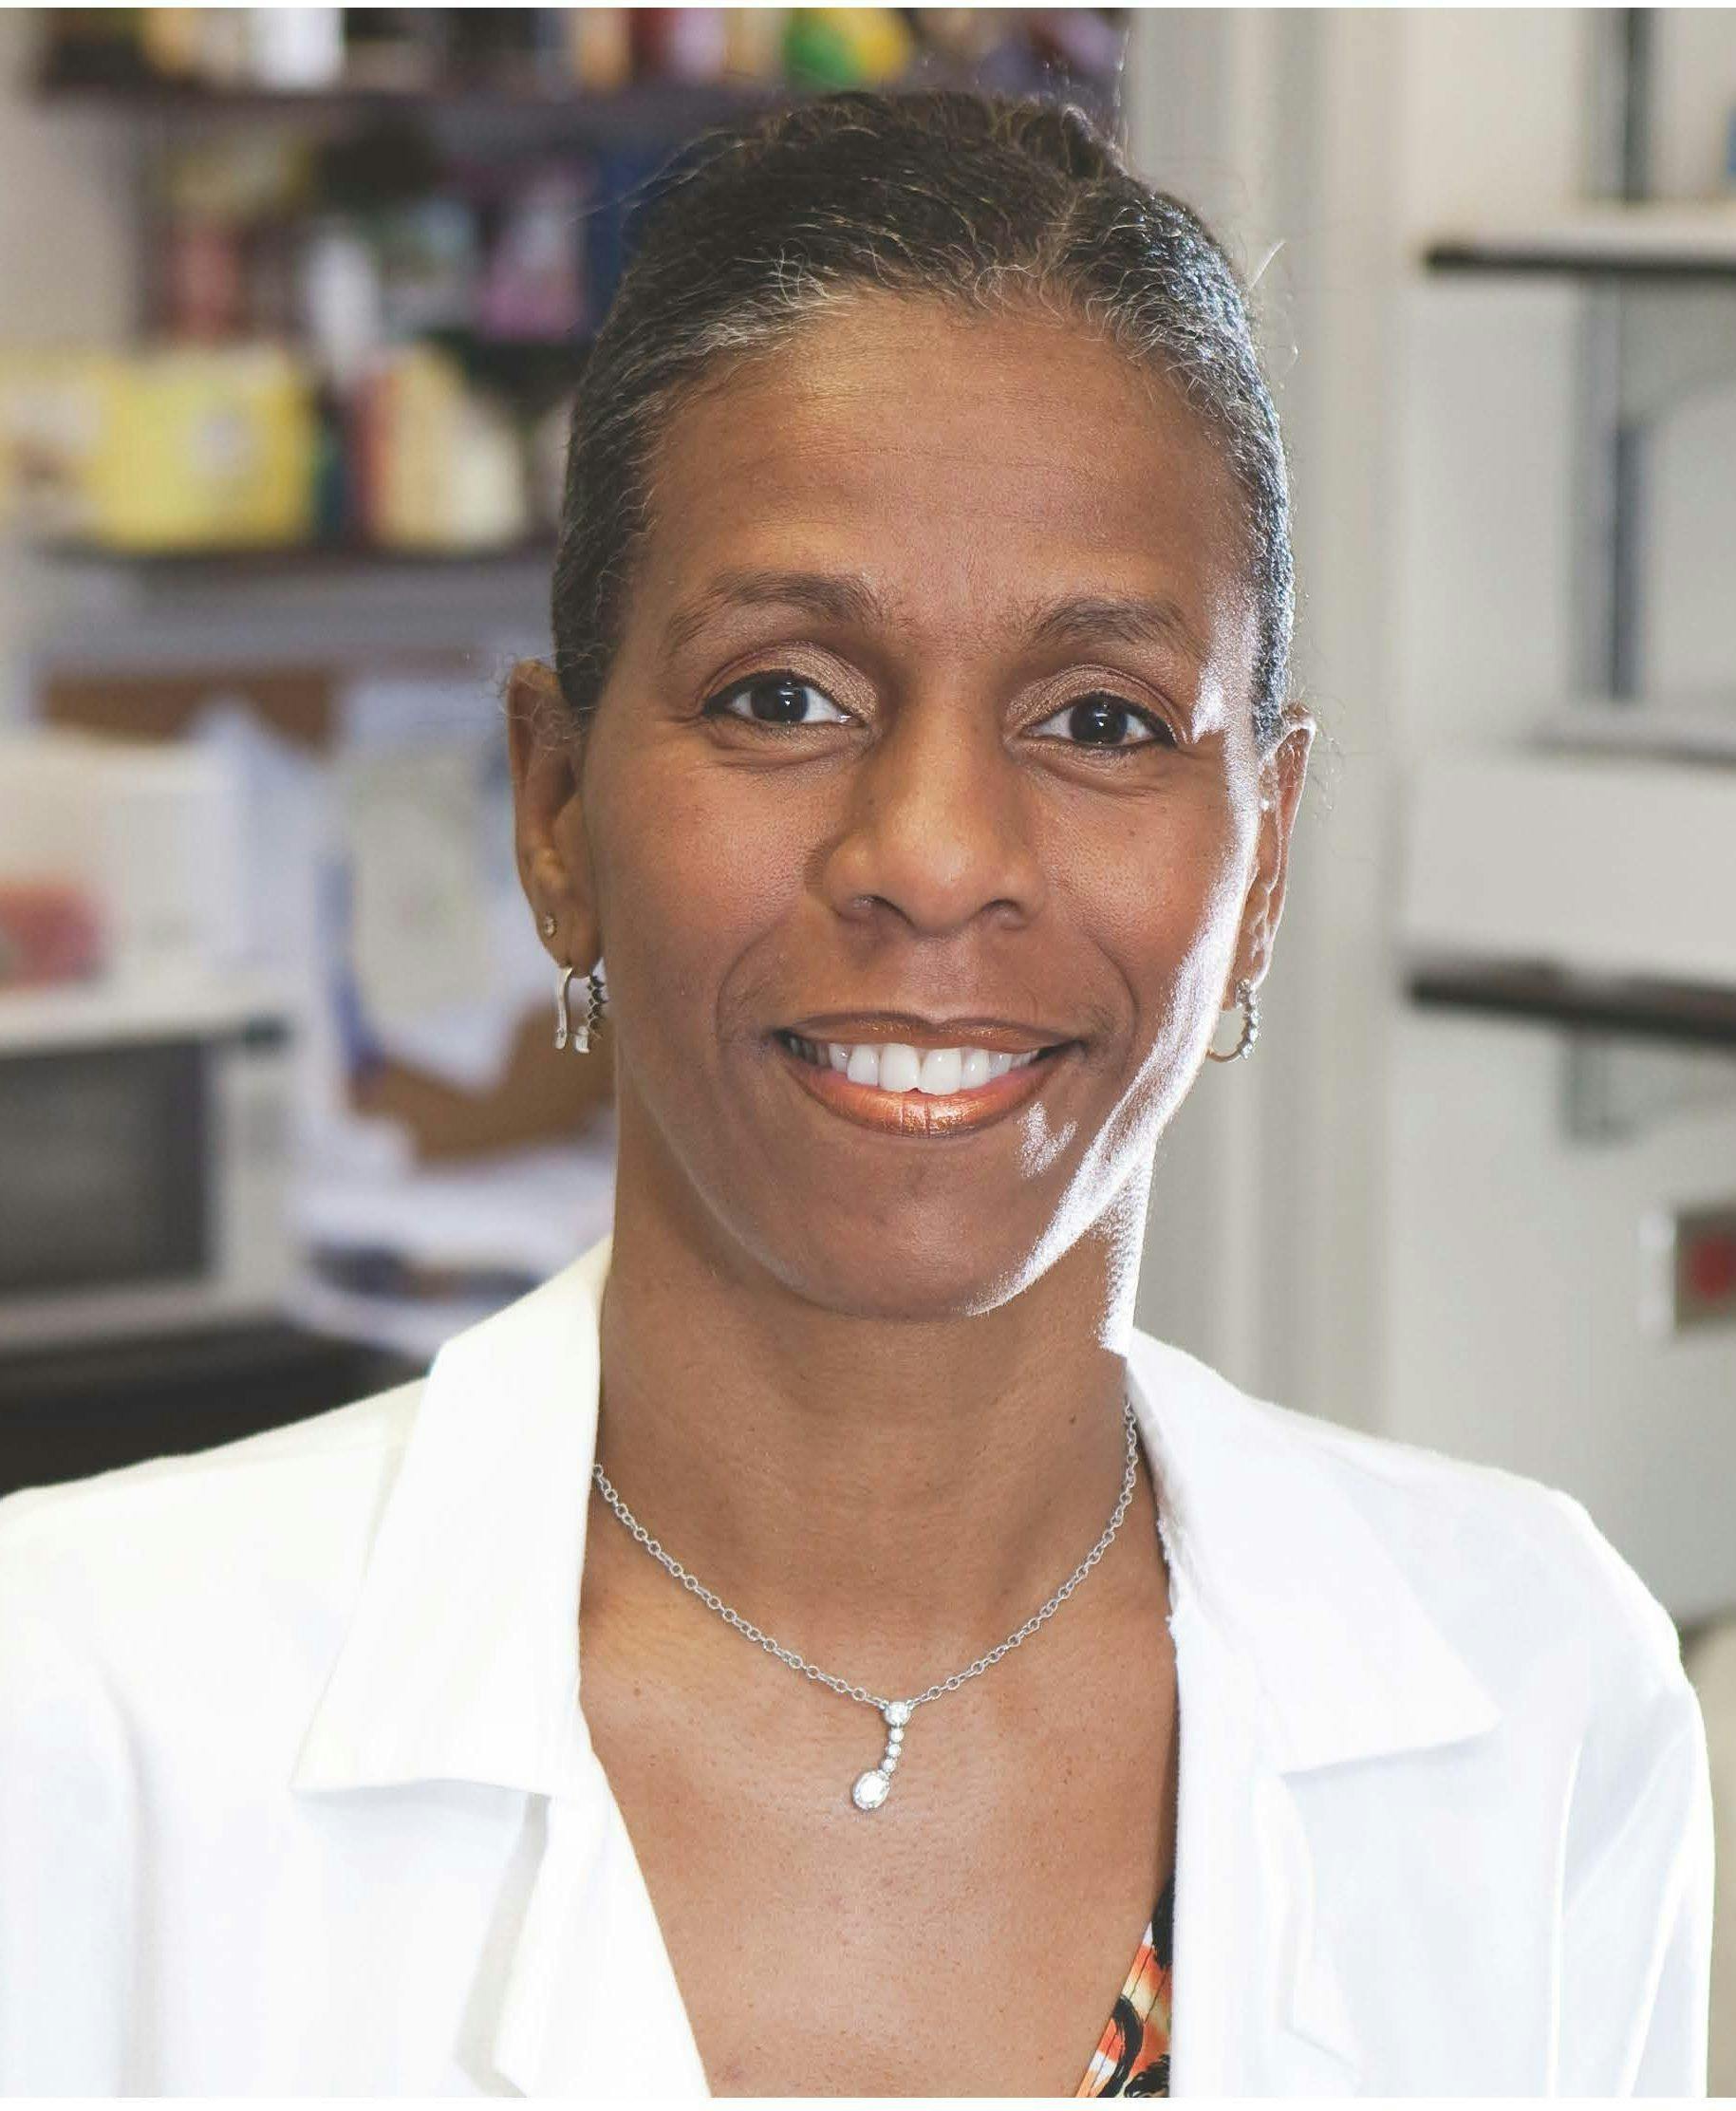 Genevieve Neal-Perry, MD, PhD